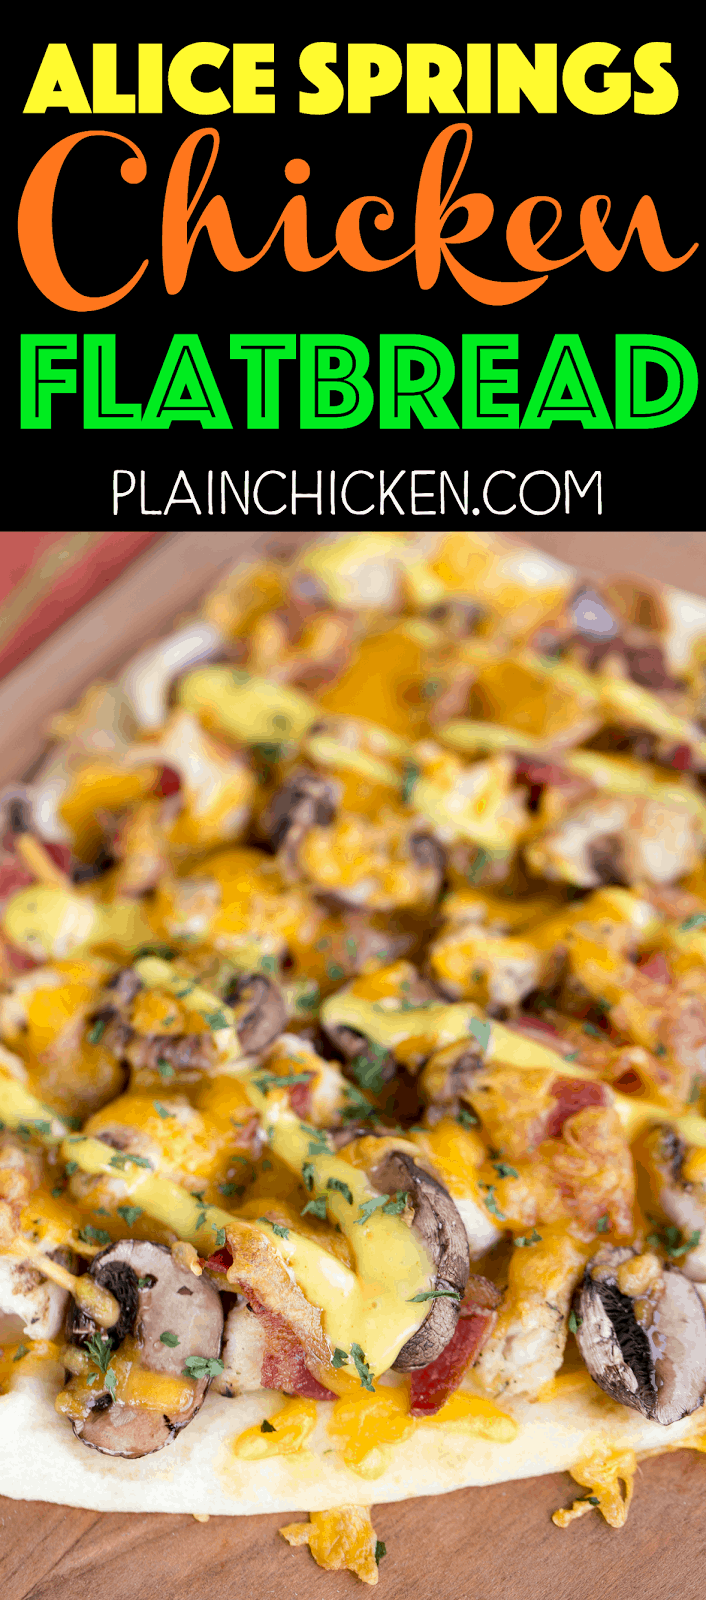 Alice Springs Chicken Flatbread - SO good!!! Chicken, bacon, honey mustard, cheddar cheese and mushrooms. This is a great way to use up leftover chicken. We made these twice last week! We just can't get enough of them!!! Easy weeknight meal! A fun change to pizza night.